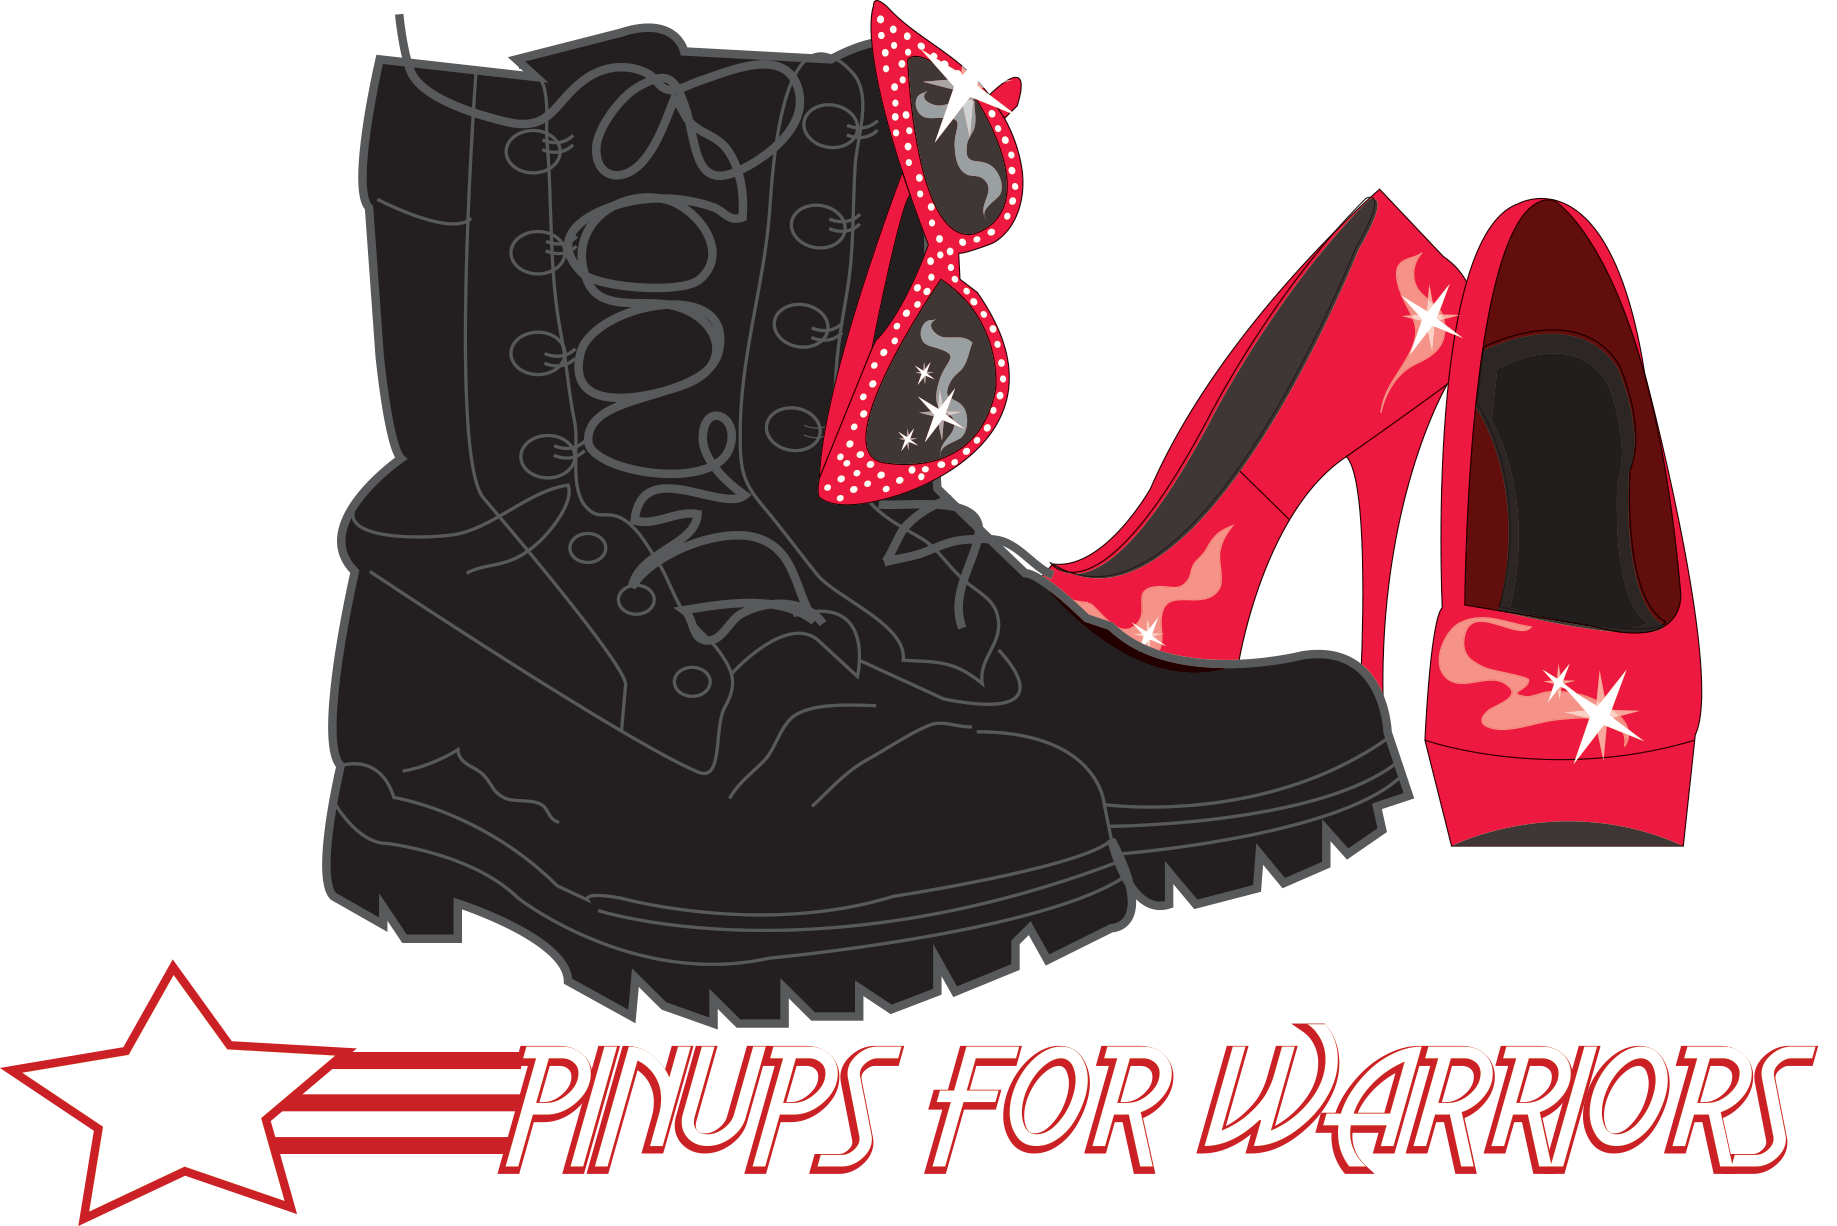 PinUps for Warriors, Inc.